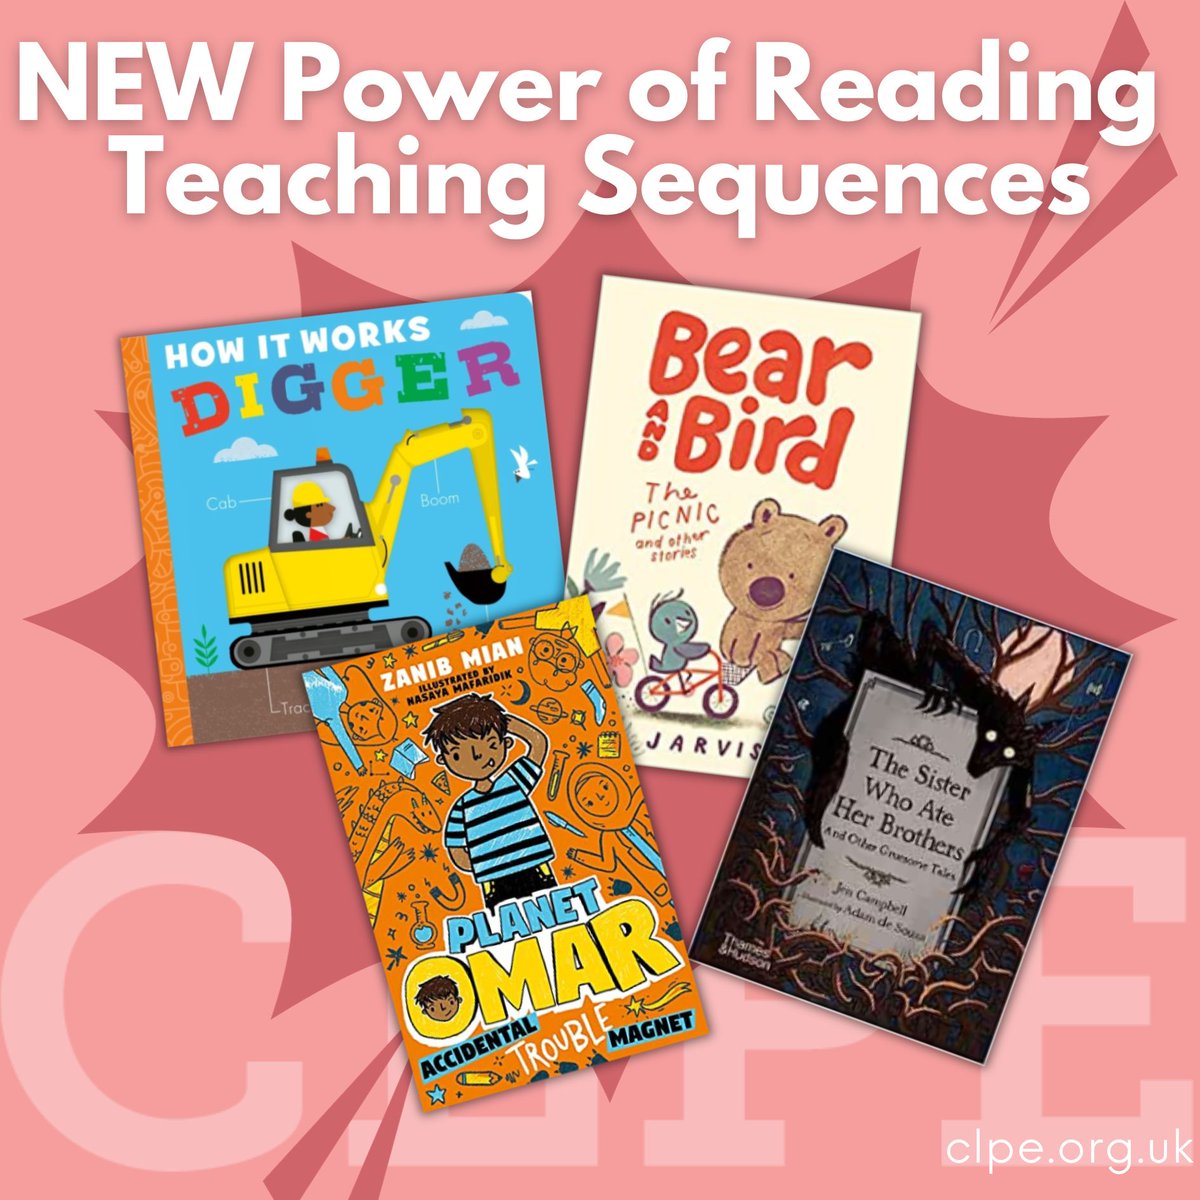 Teachers, we'd like to welcome you back for the new term with FOUR new in-depth #PowerofReading Sequences, based on high-quality books from Molly Littleboy, @heyimjarvis, @Zendibble and @jenvcampbell. Find them here: ow.ly/hRPA50QeZXA